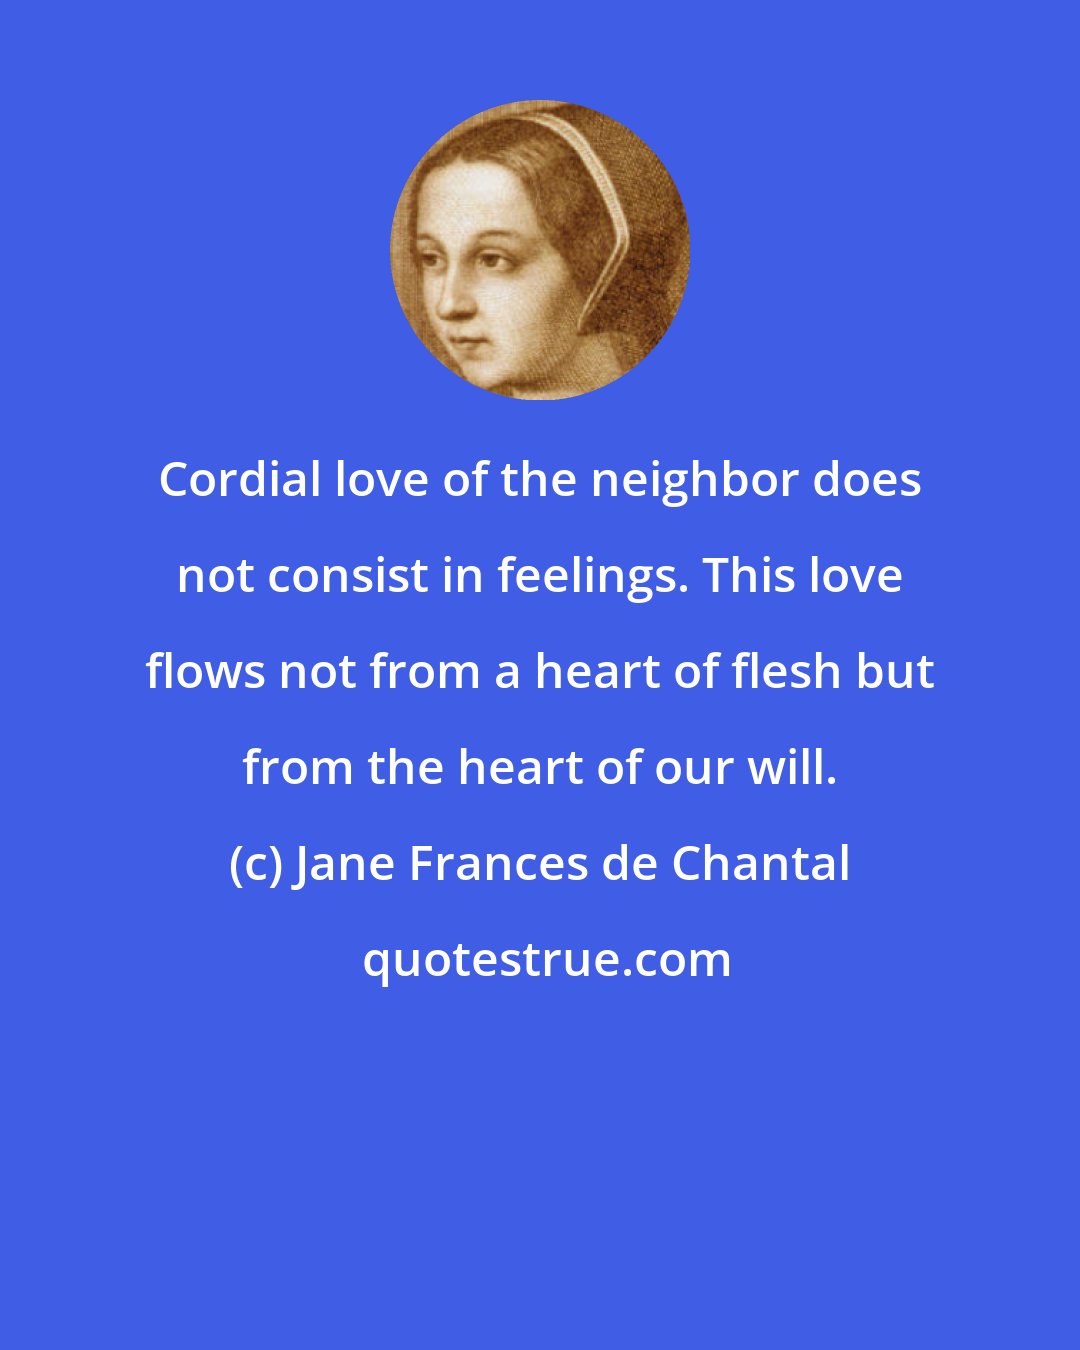 Jane Frances de Chantal: Cordial love of the neighbor does not consist in feelings. This love flows not from a heart of flesh but from the heart of our will.